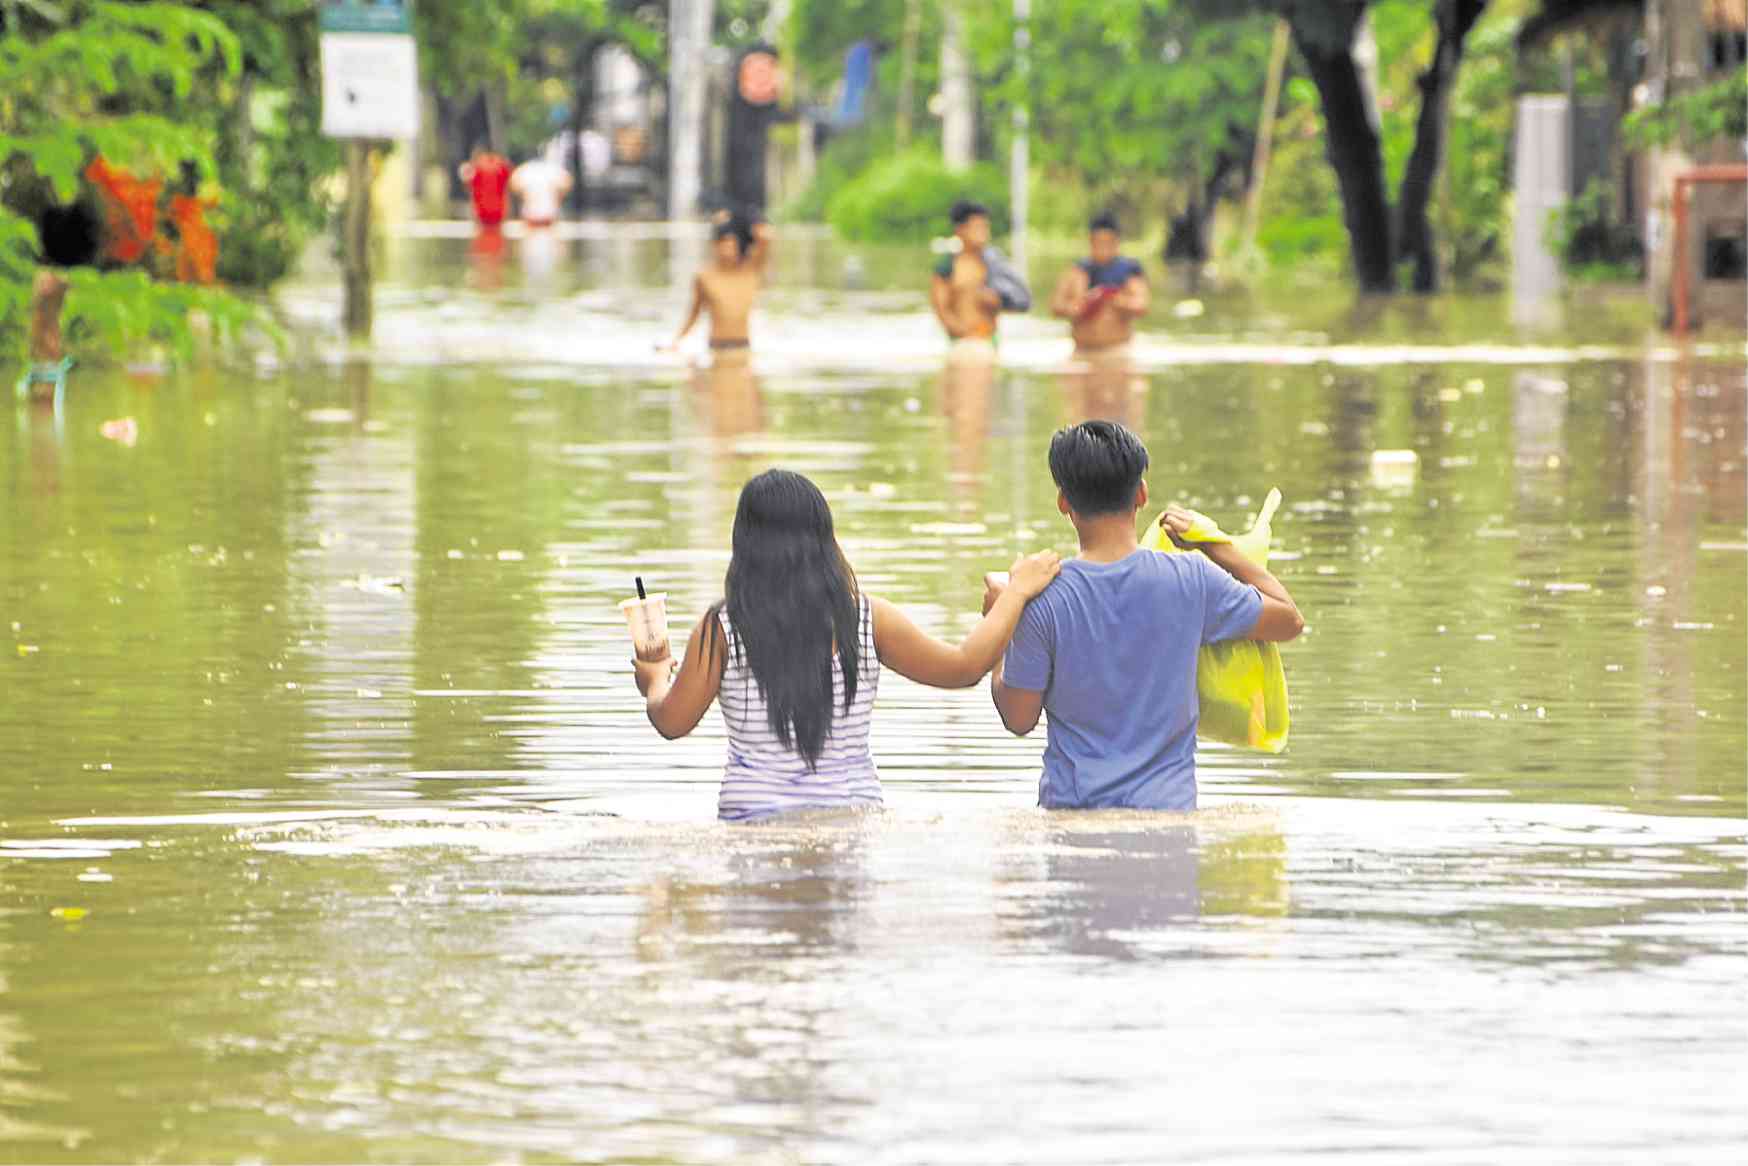 State of calamity declared in Pangasinan and Cavite